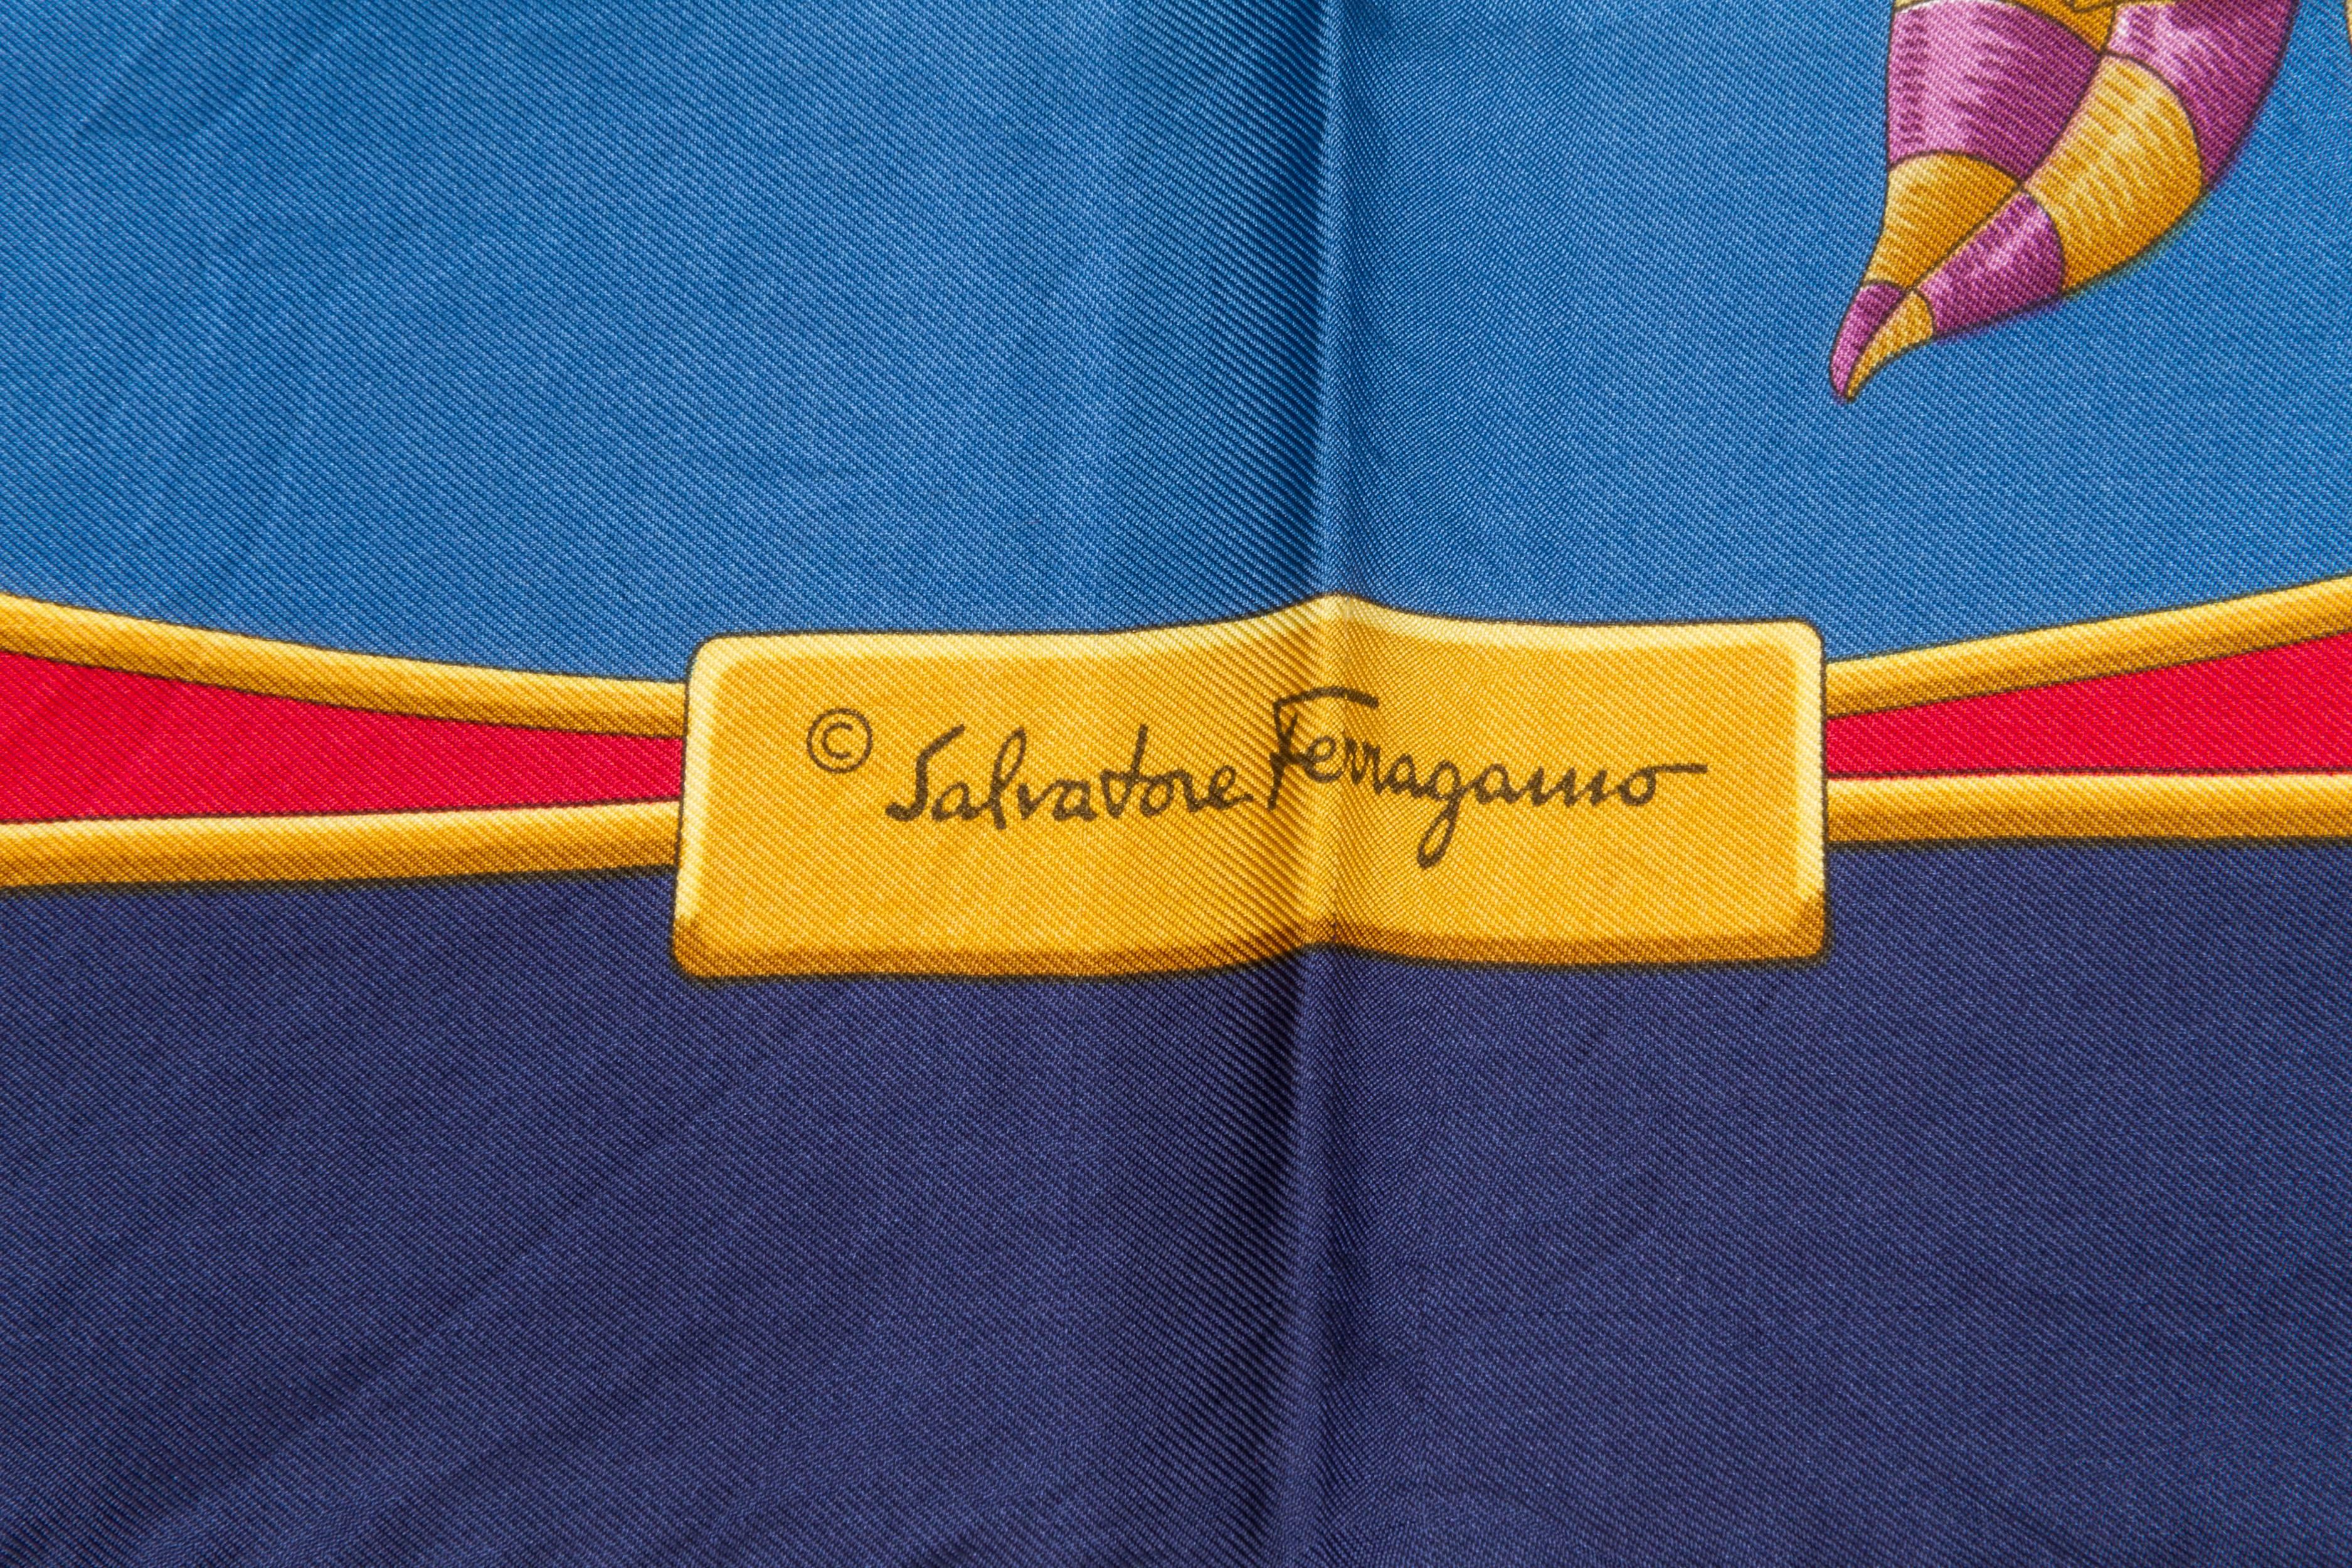 Salvadore Ferragamo silk twill regal gold peacock scarf with hand rolled edges. Very good condition with minor wear. Does not include box. 